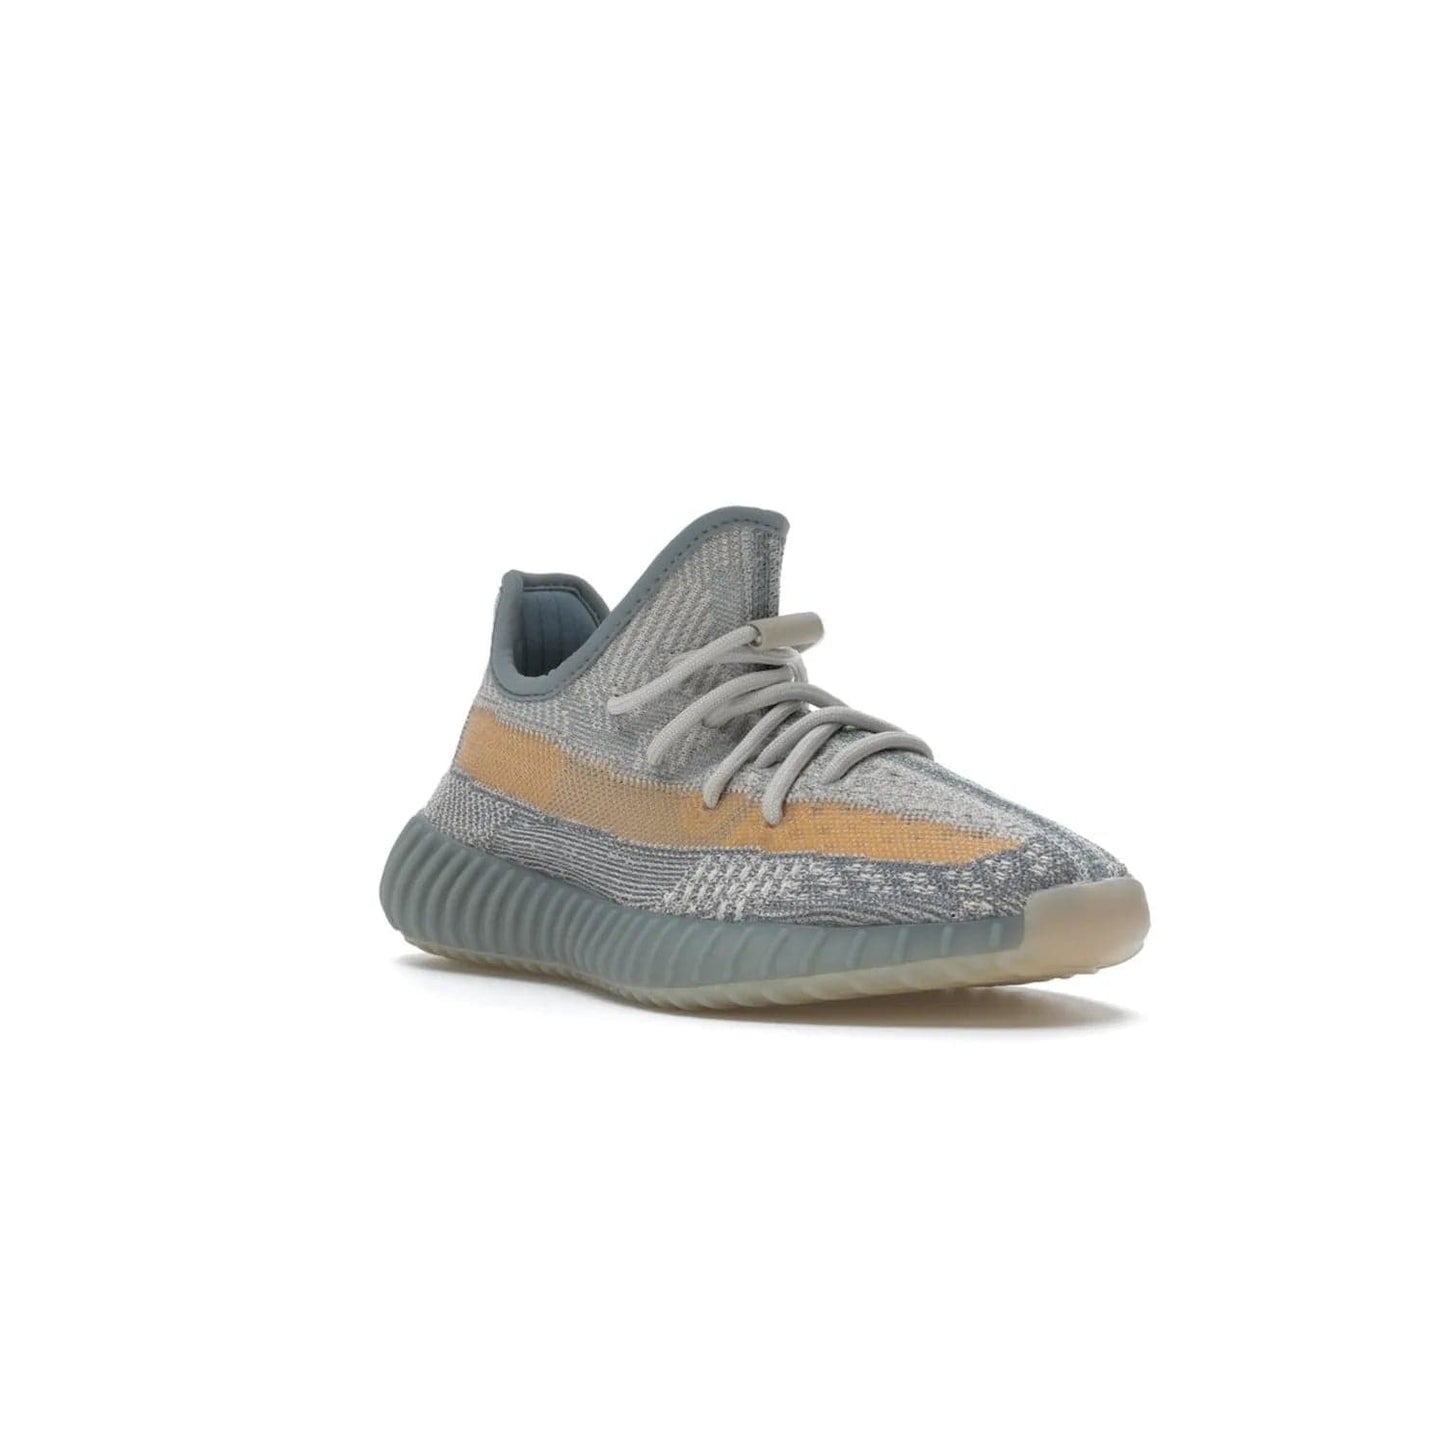 adidas Yeezy Boost 350 V2 Israfil - Image 6 - Only at www.BallersClubKickz.com - The adidas Yeezy Boost 350 V2 Israfil provides a unique style with a triple colorway and multi-colored threads. Featuring BOOST cushioning in a translucent midsole, this must-have sneaker drops in August 2020.